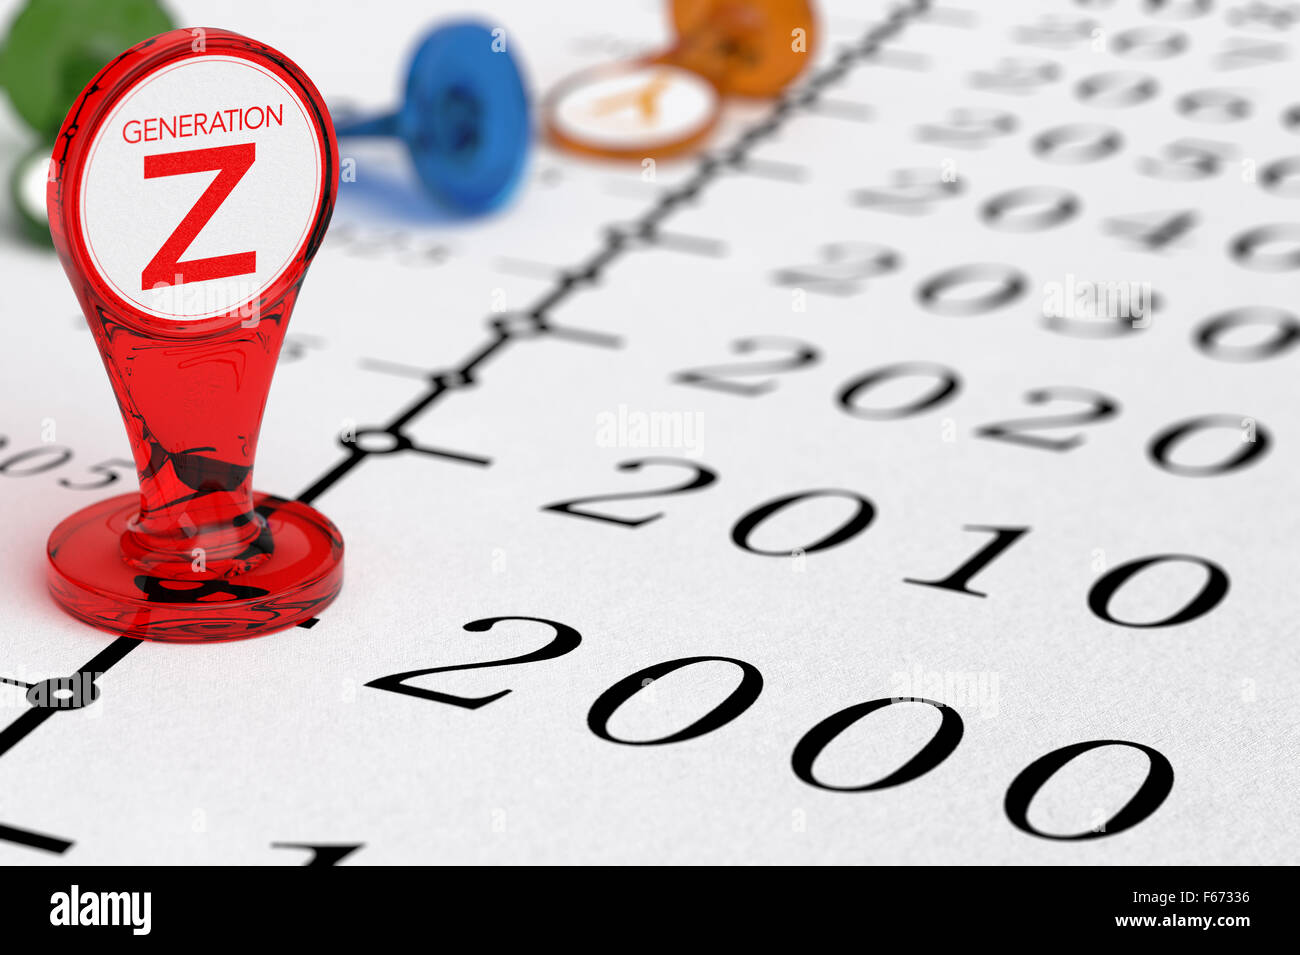 Timeline with red sign where it is written the text generation Z, illustration of millenial generations born after the year 2000 Stock Photo